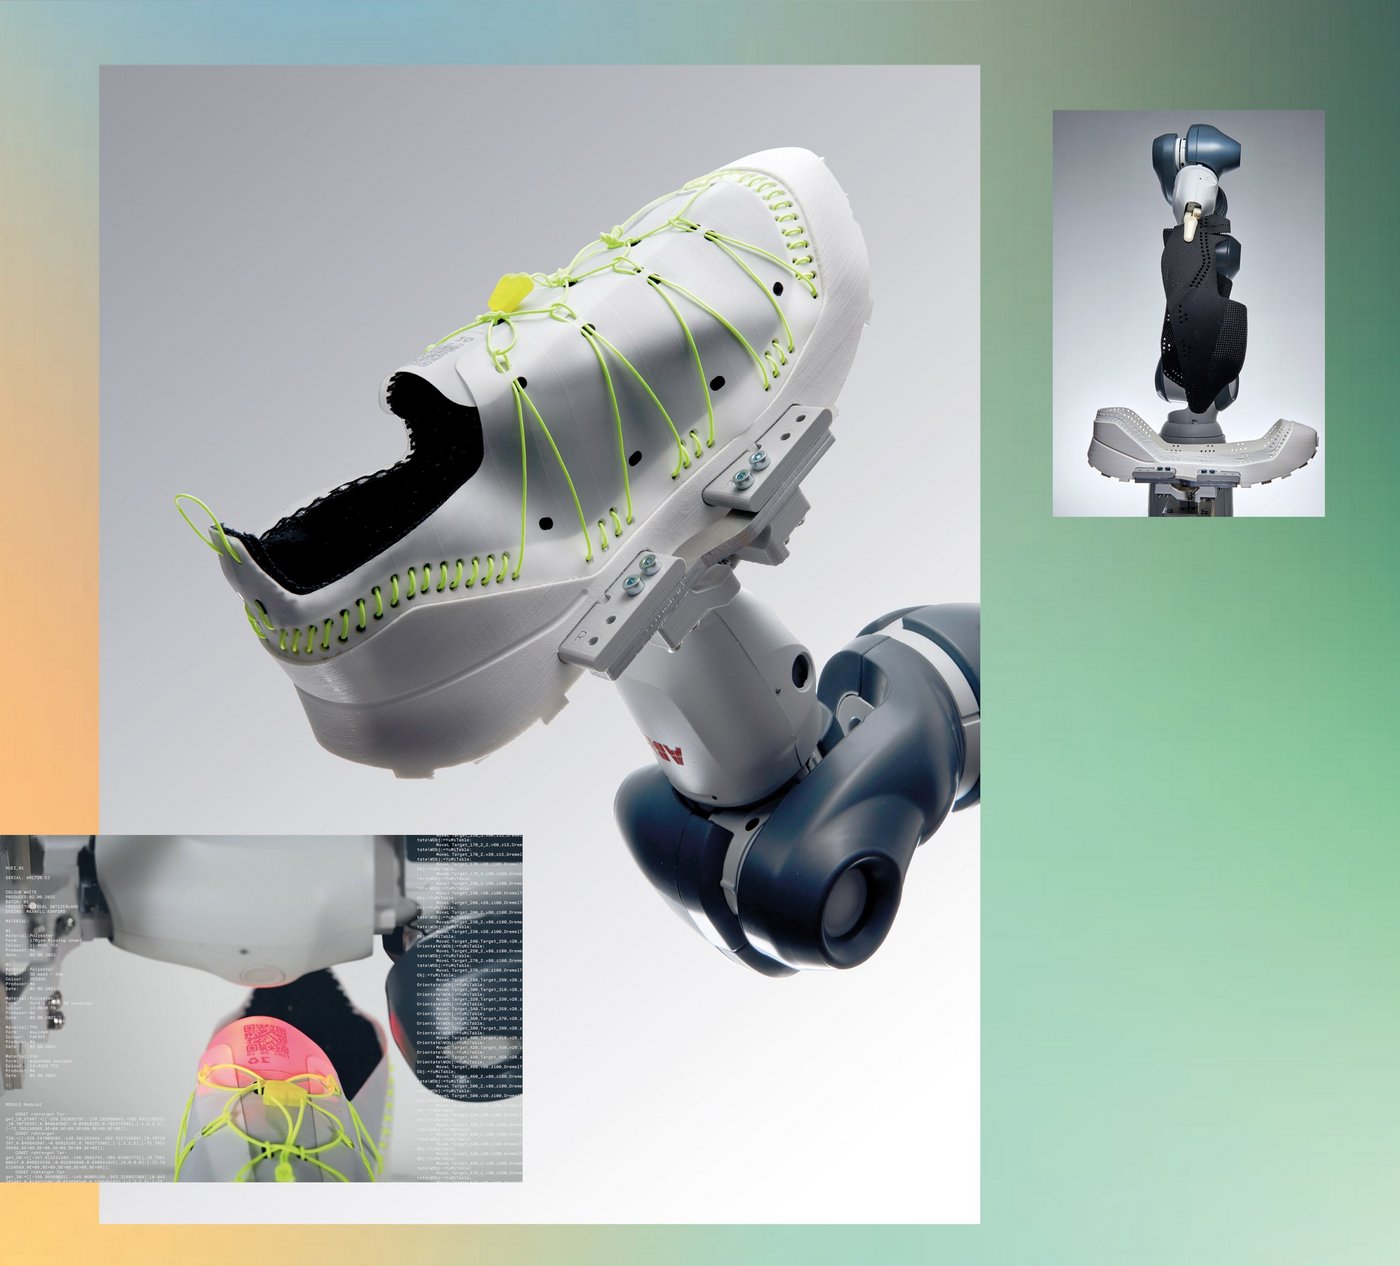 Collage of 3 images on a gradient background. Shown are different stages of a sneaker production process, which is carried out by a robot.